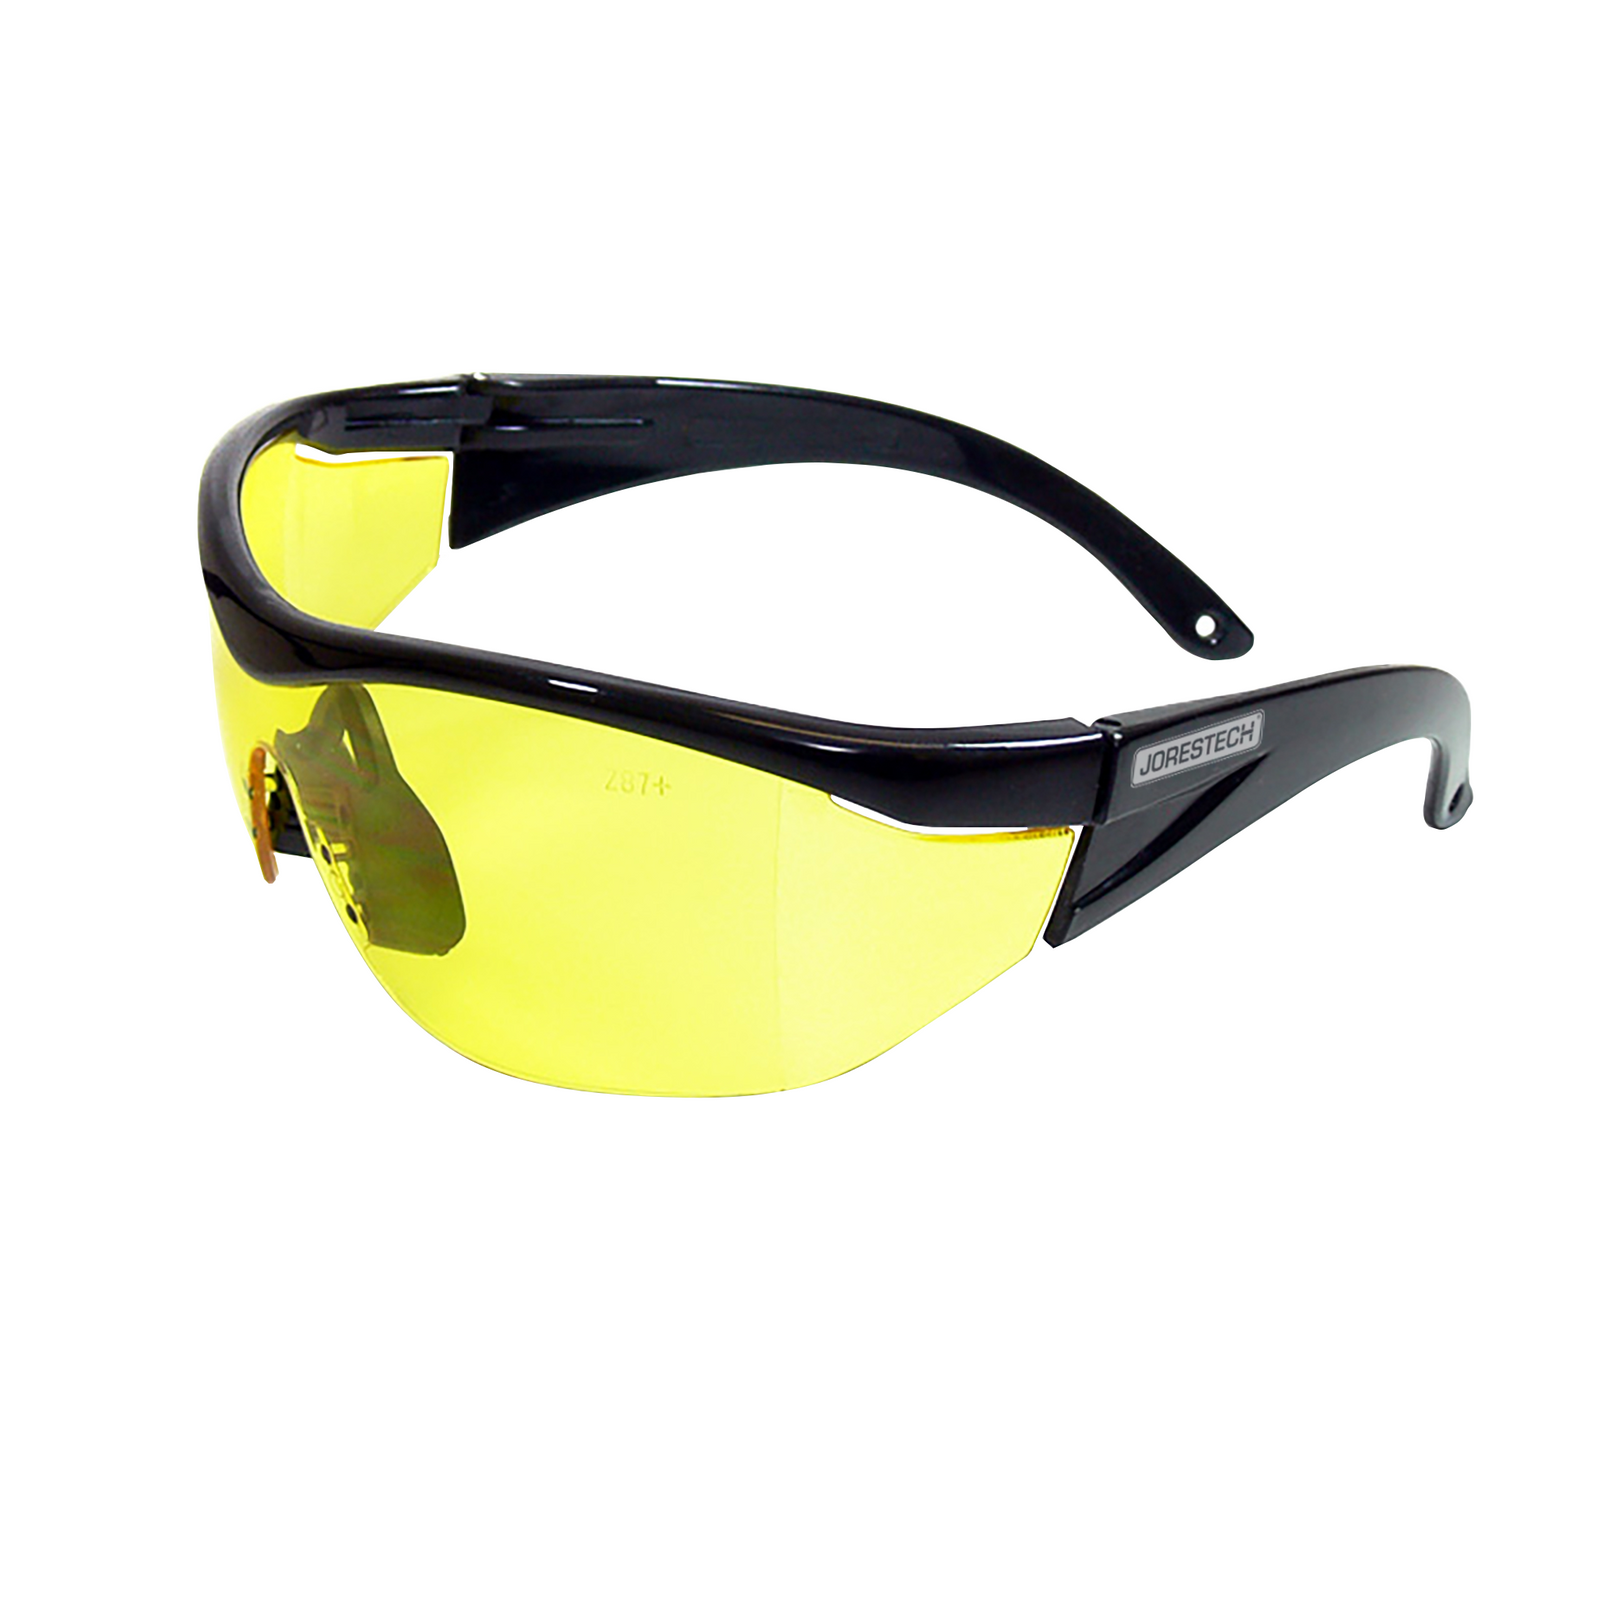 Diagonal view of a modern design framed JORESTECH safety yellow glasses with side shields for high impact protection. There is a embedder mark of the polycarbonate glass that reads Z87+ which is the ANSI standard